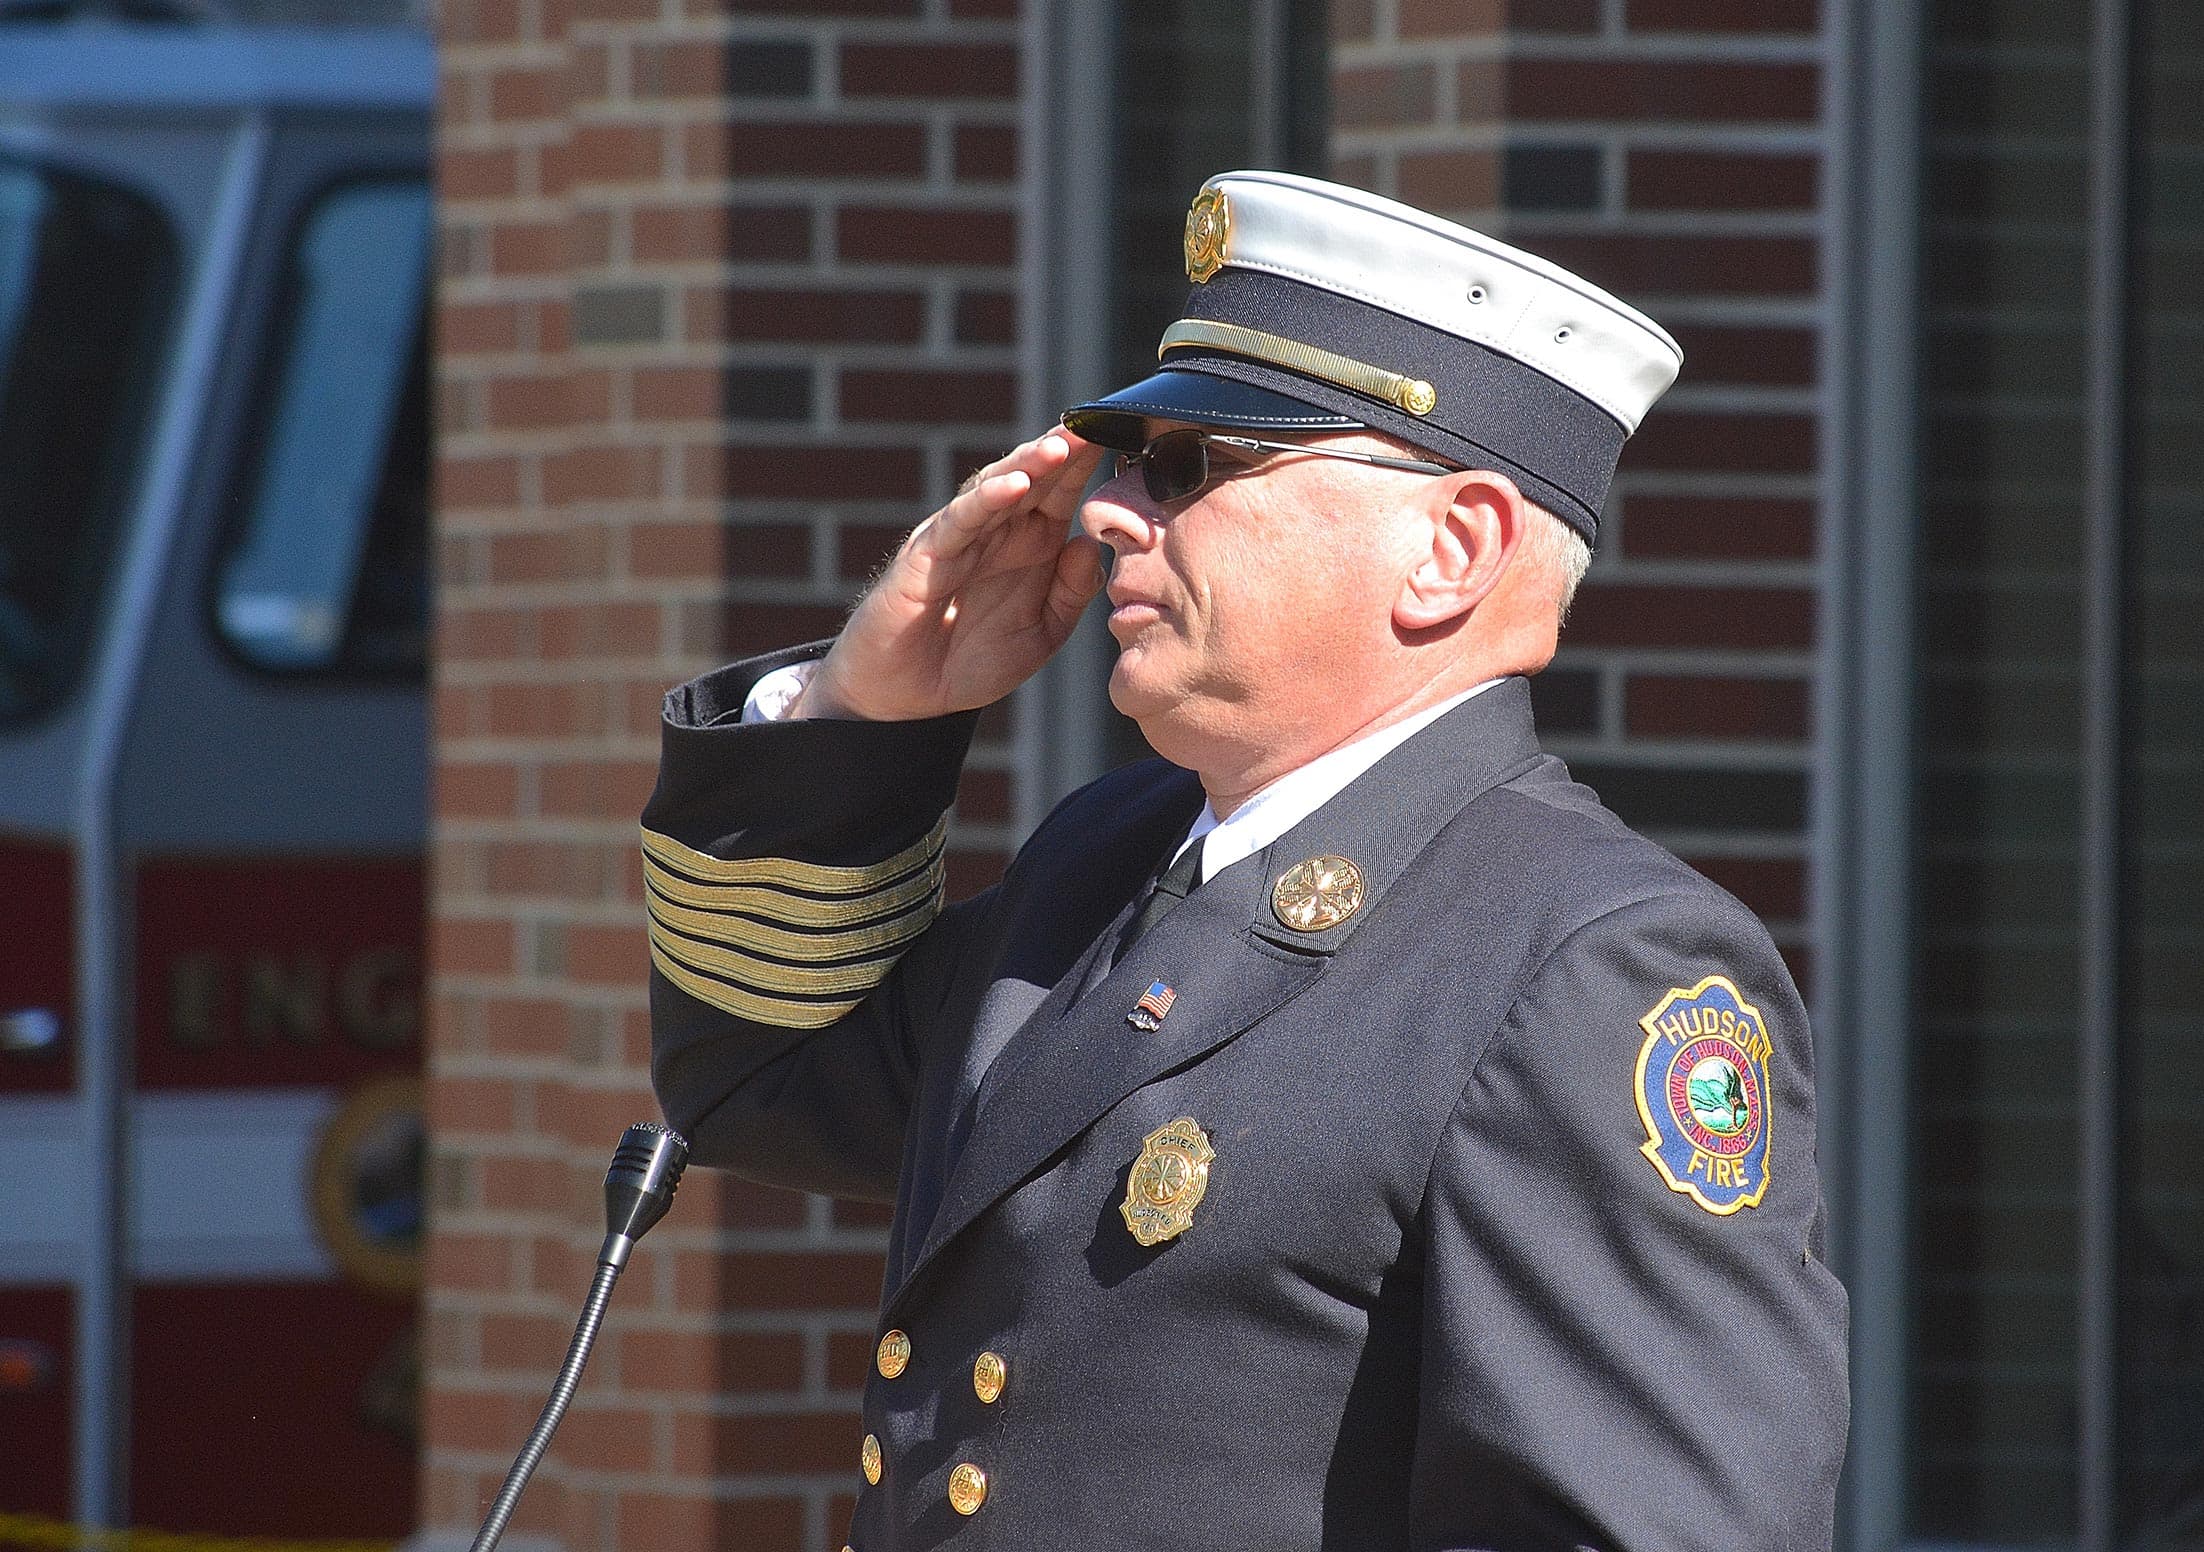 Johannes recognized for career with Hudson Fire Department